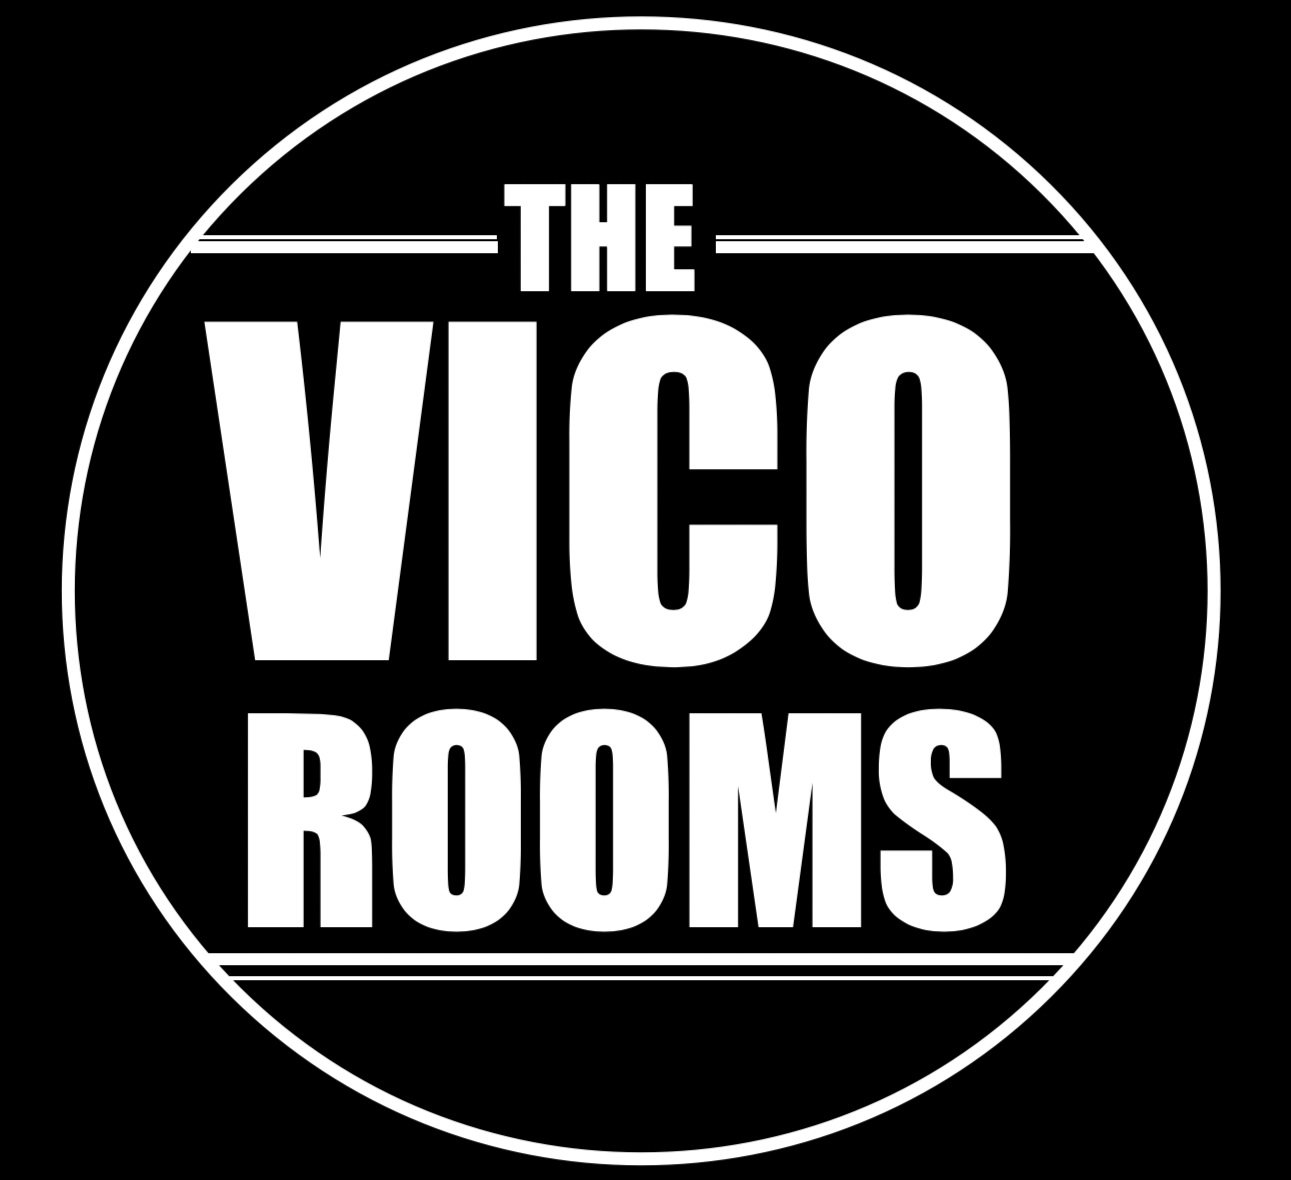 THE VICO ROOMS